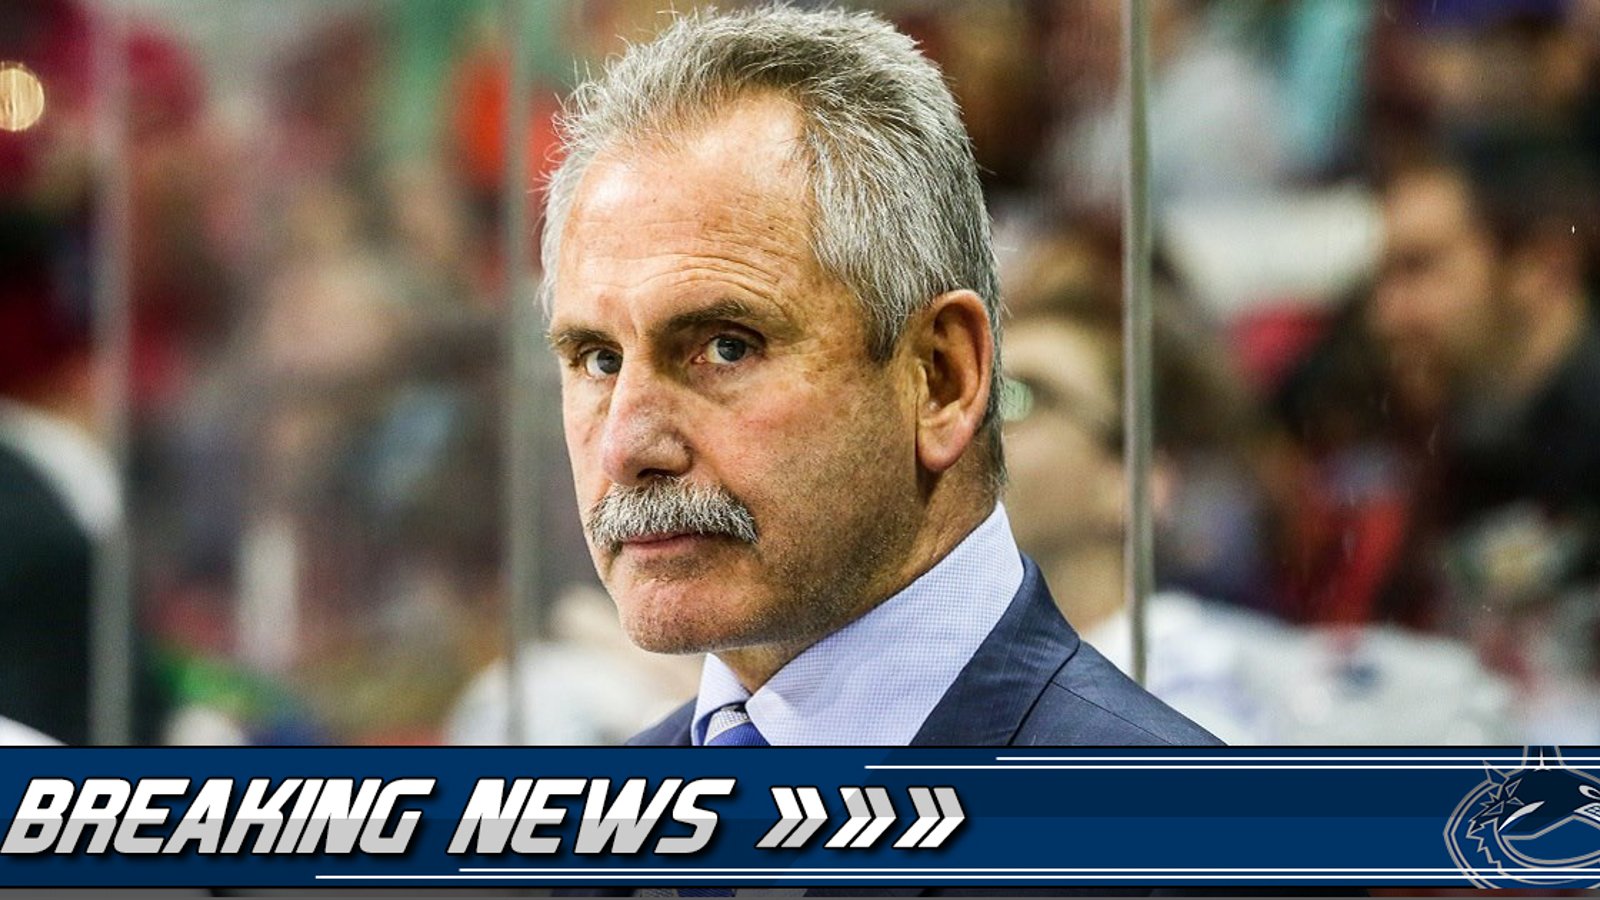 Breaking News: Willie Desjardins has harsh comments for one of his player.